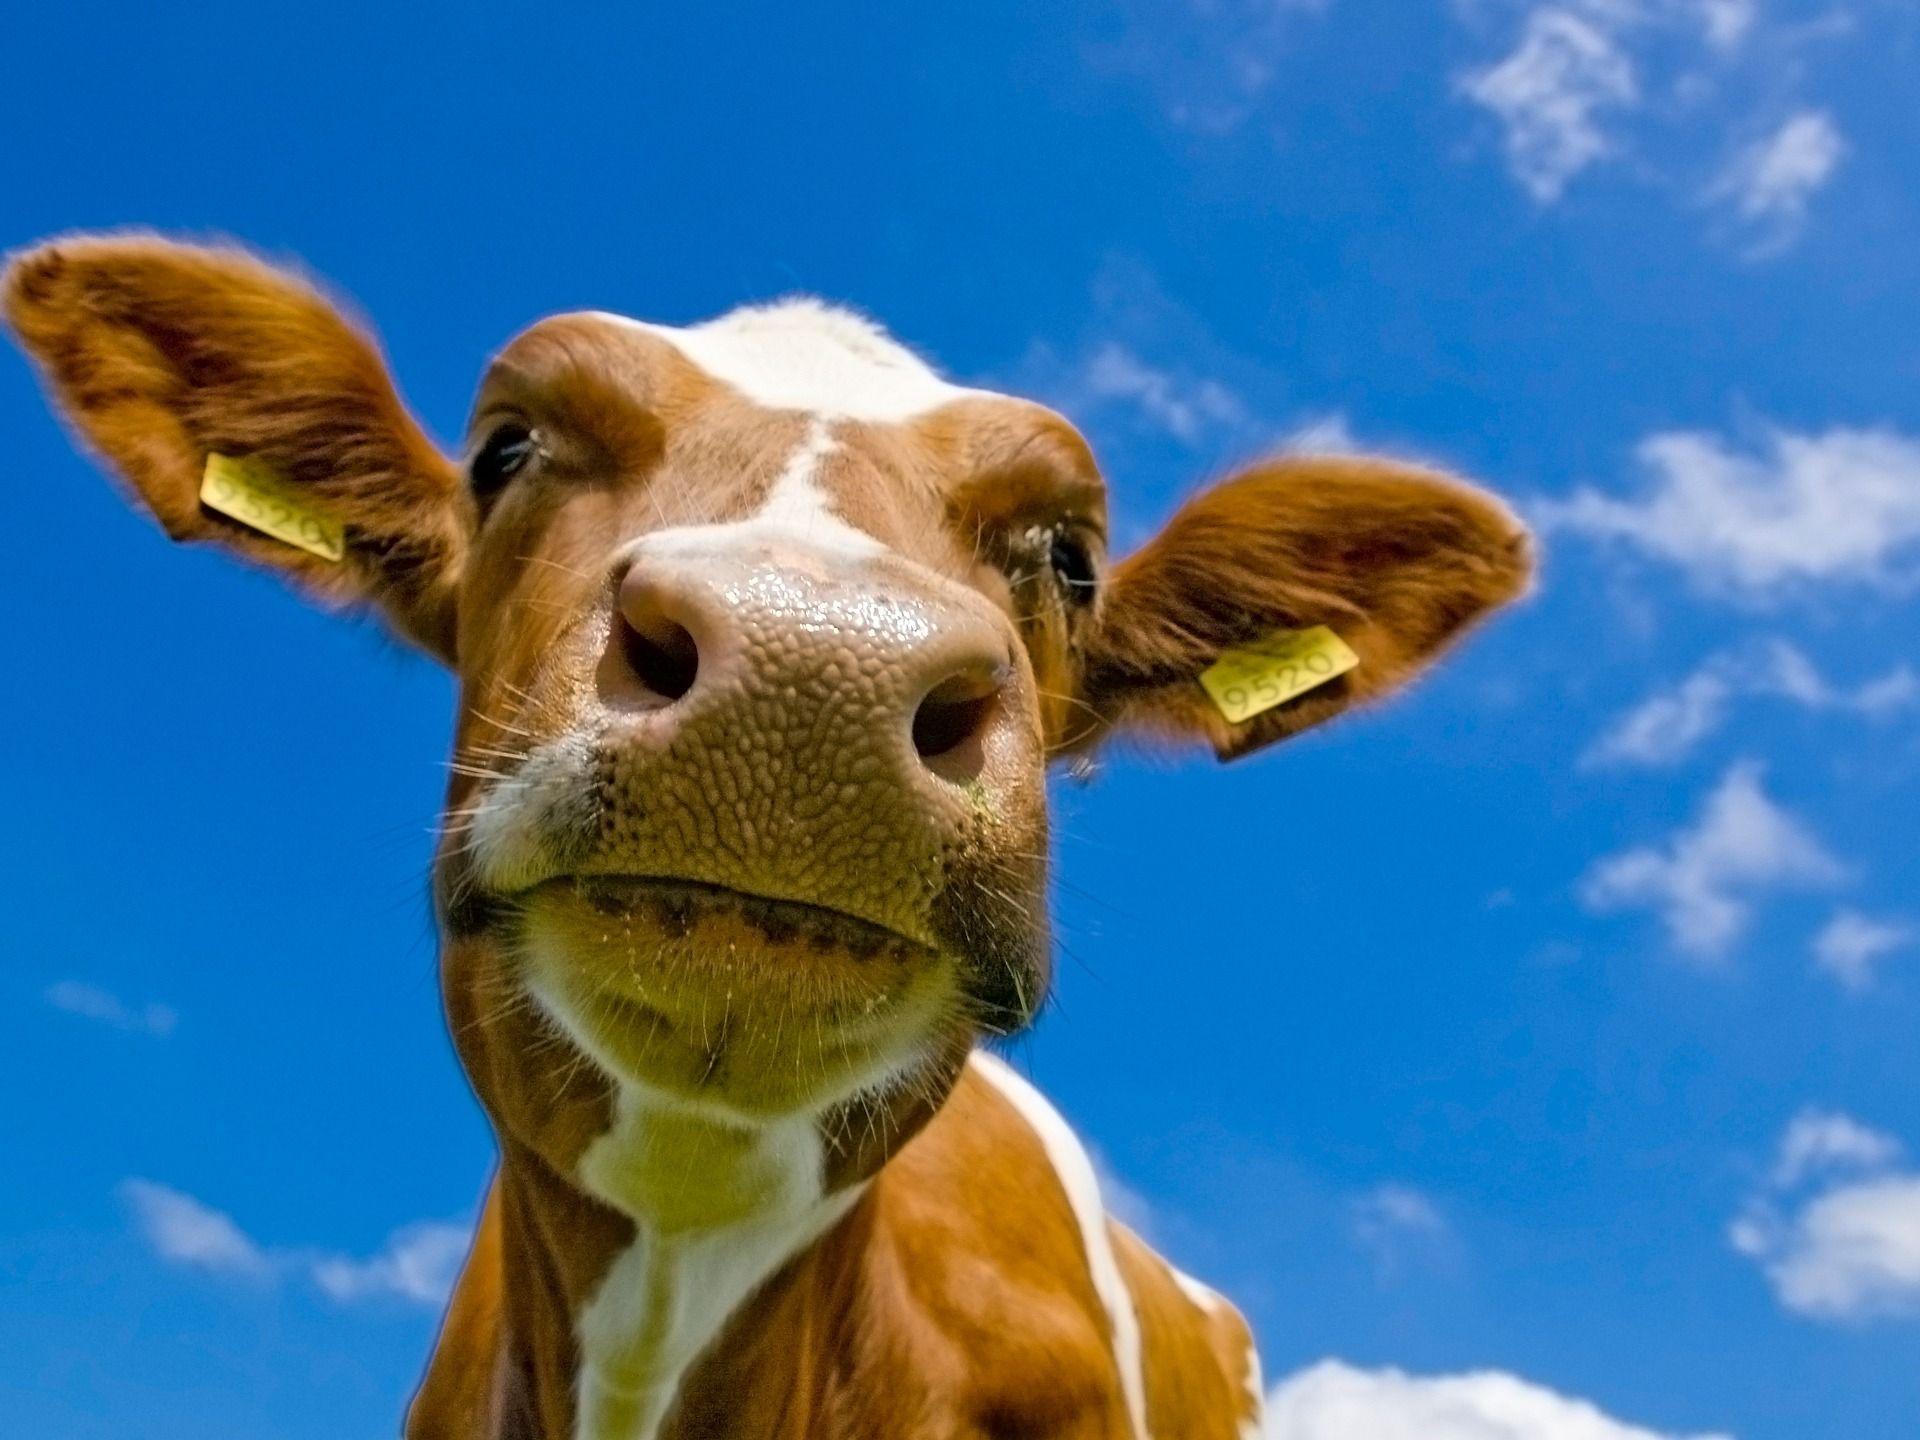 Cow Wallpaper Cows Animals Wallpaper in jpg format for free download